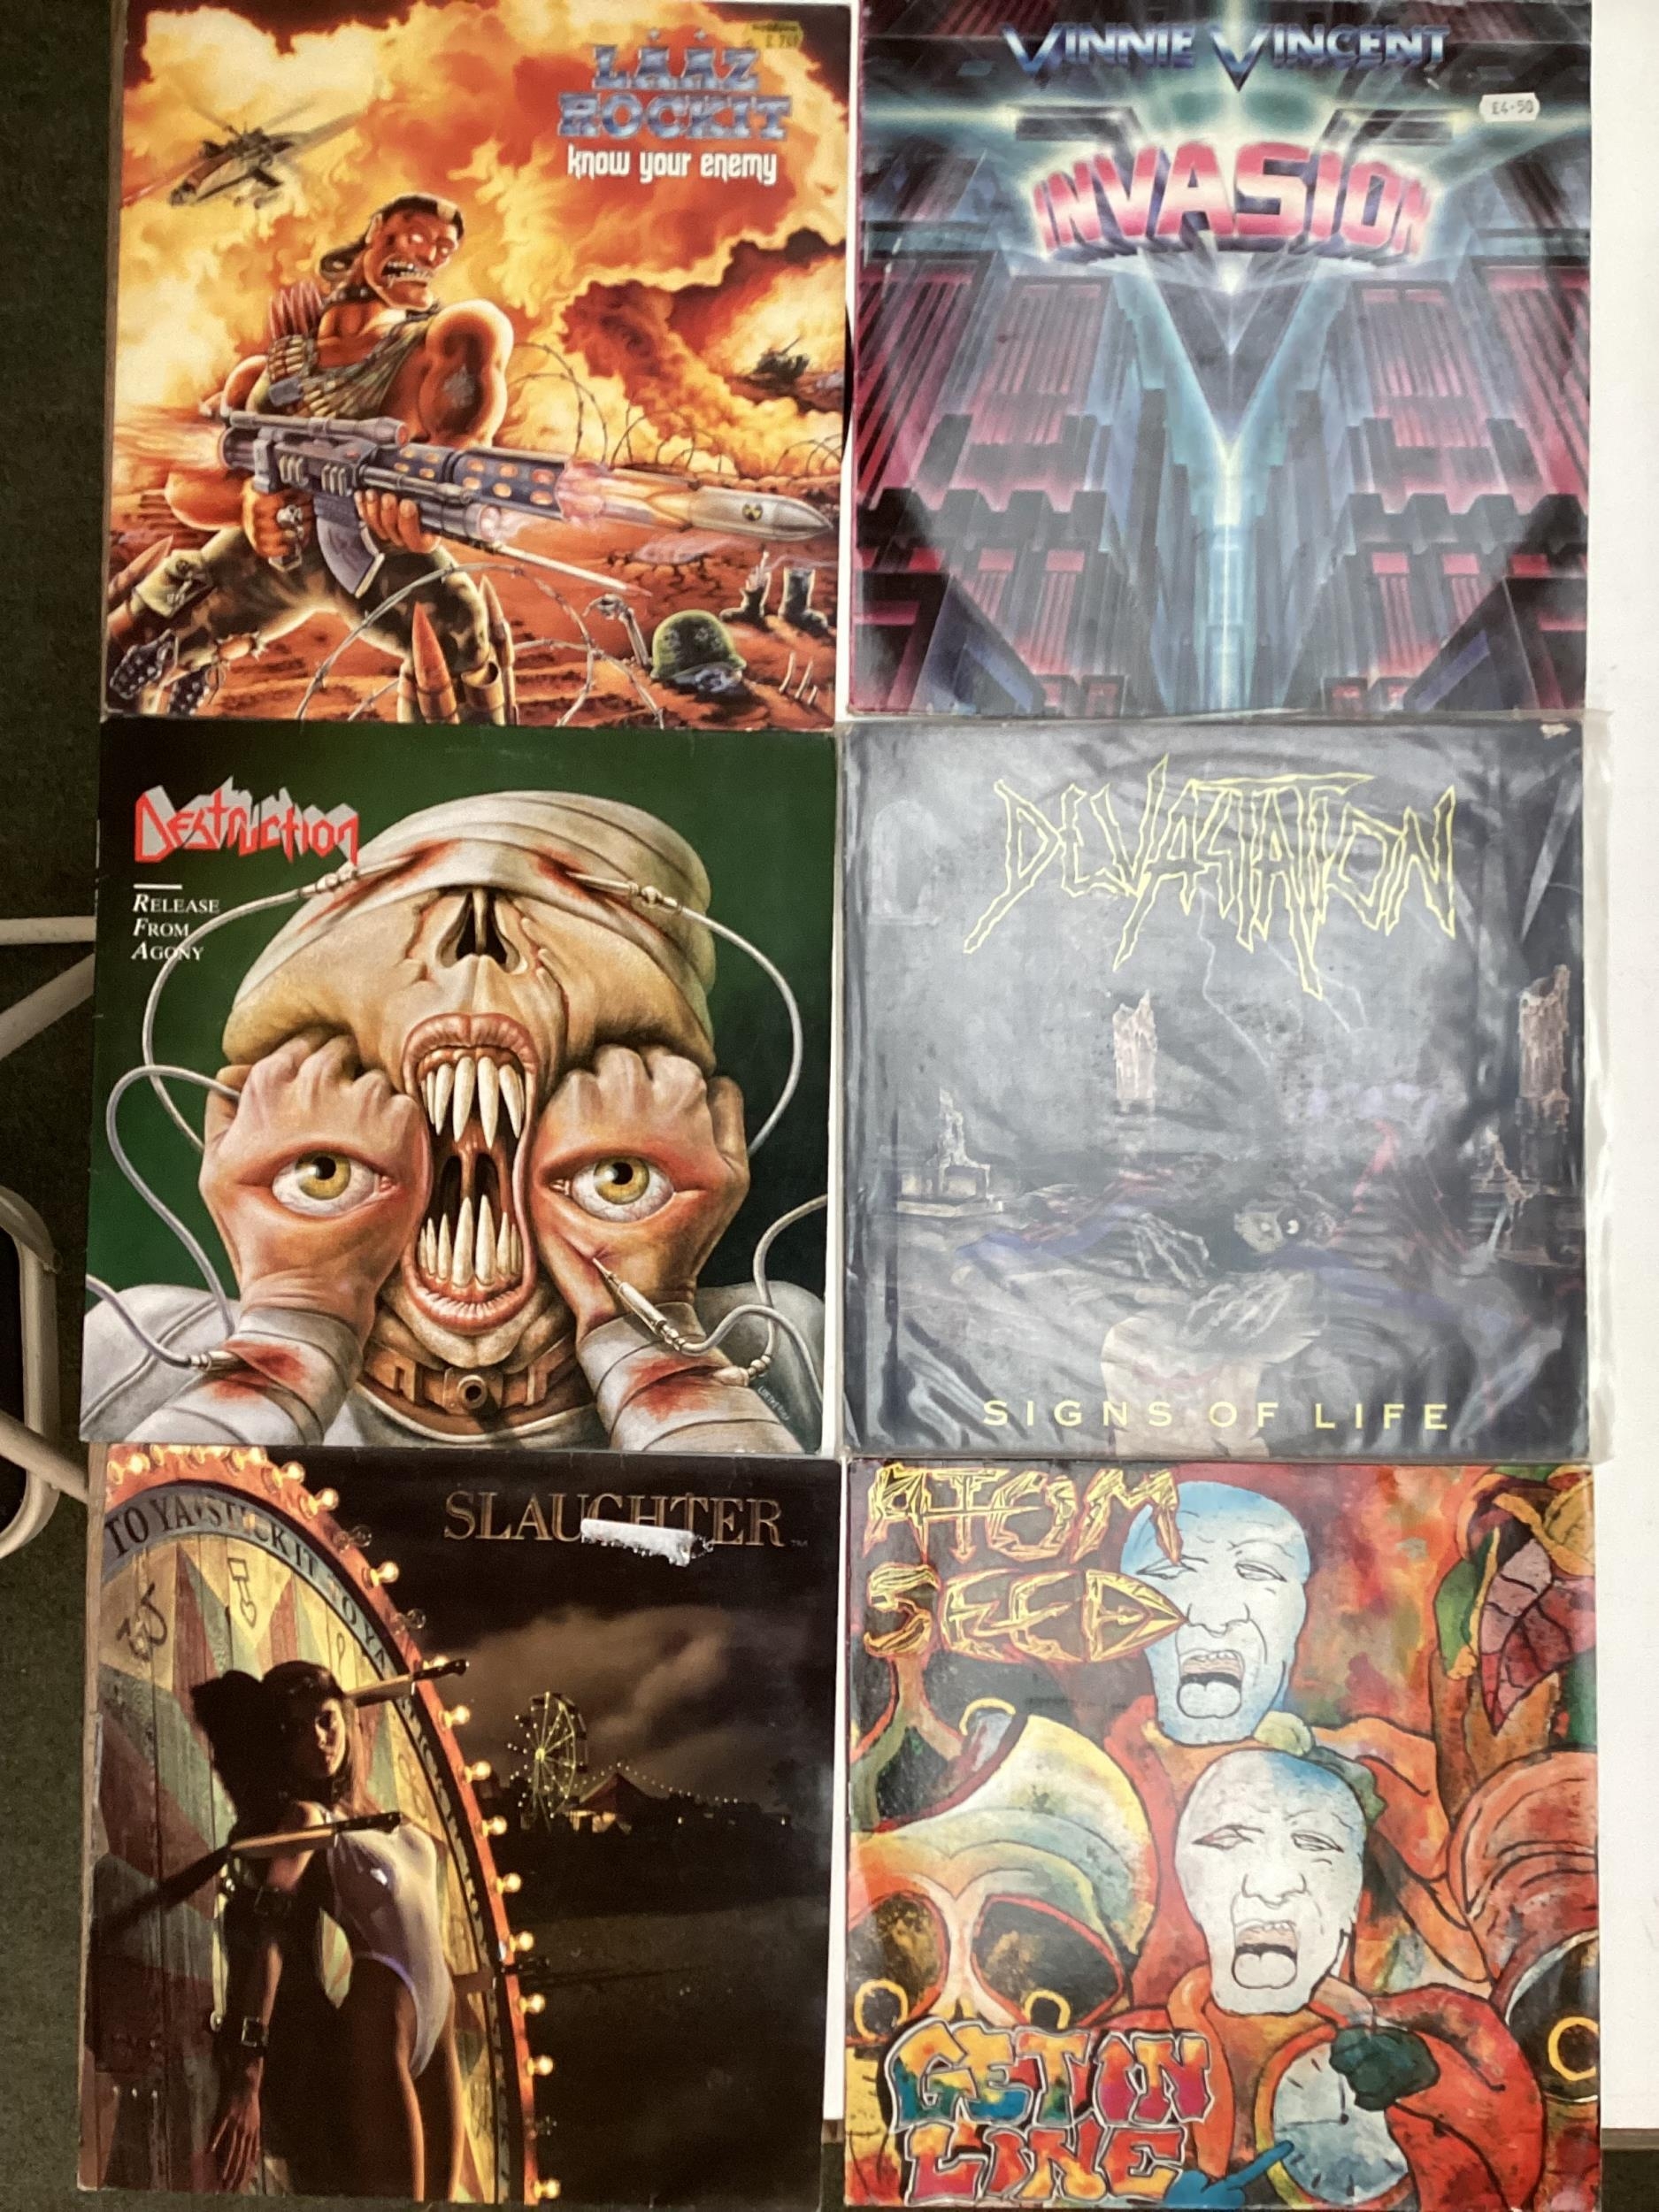 Vinyl records circa 18, see photos for a selection of albums, Slaughter Stick It To Ya, Atom Seed - Image 2 of 3